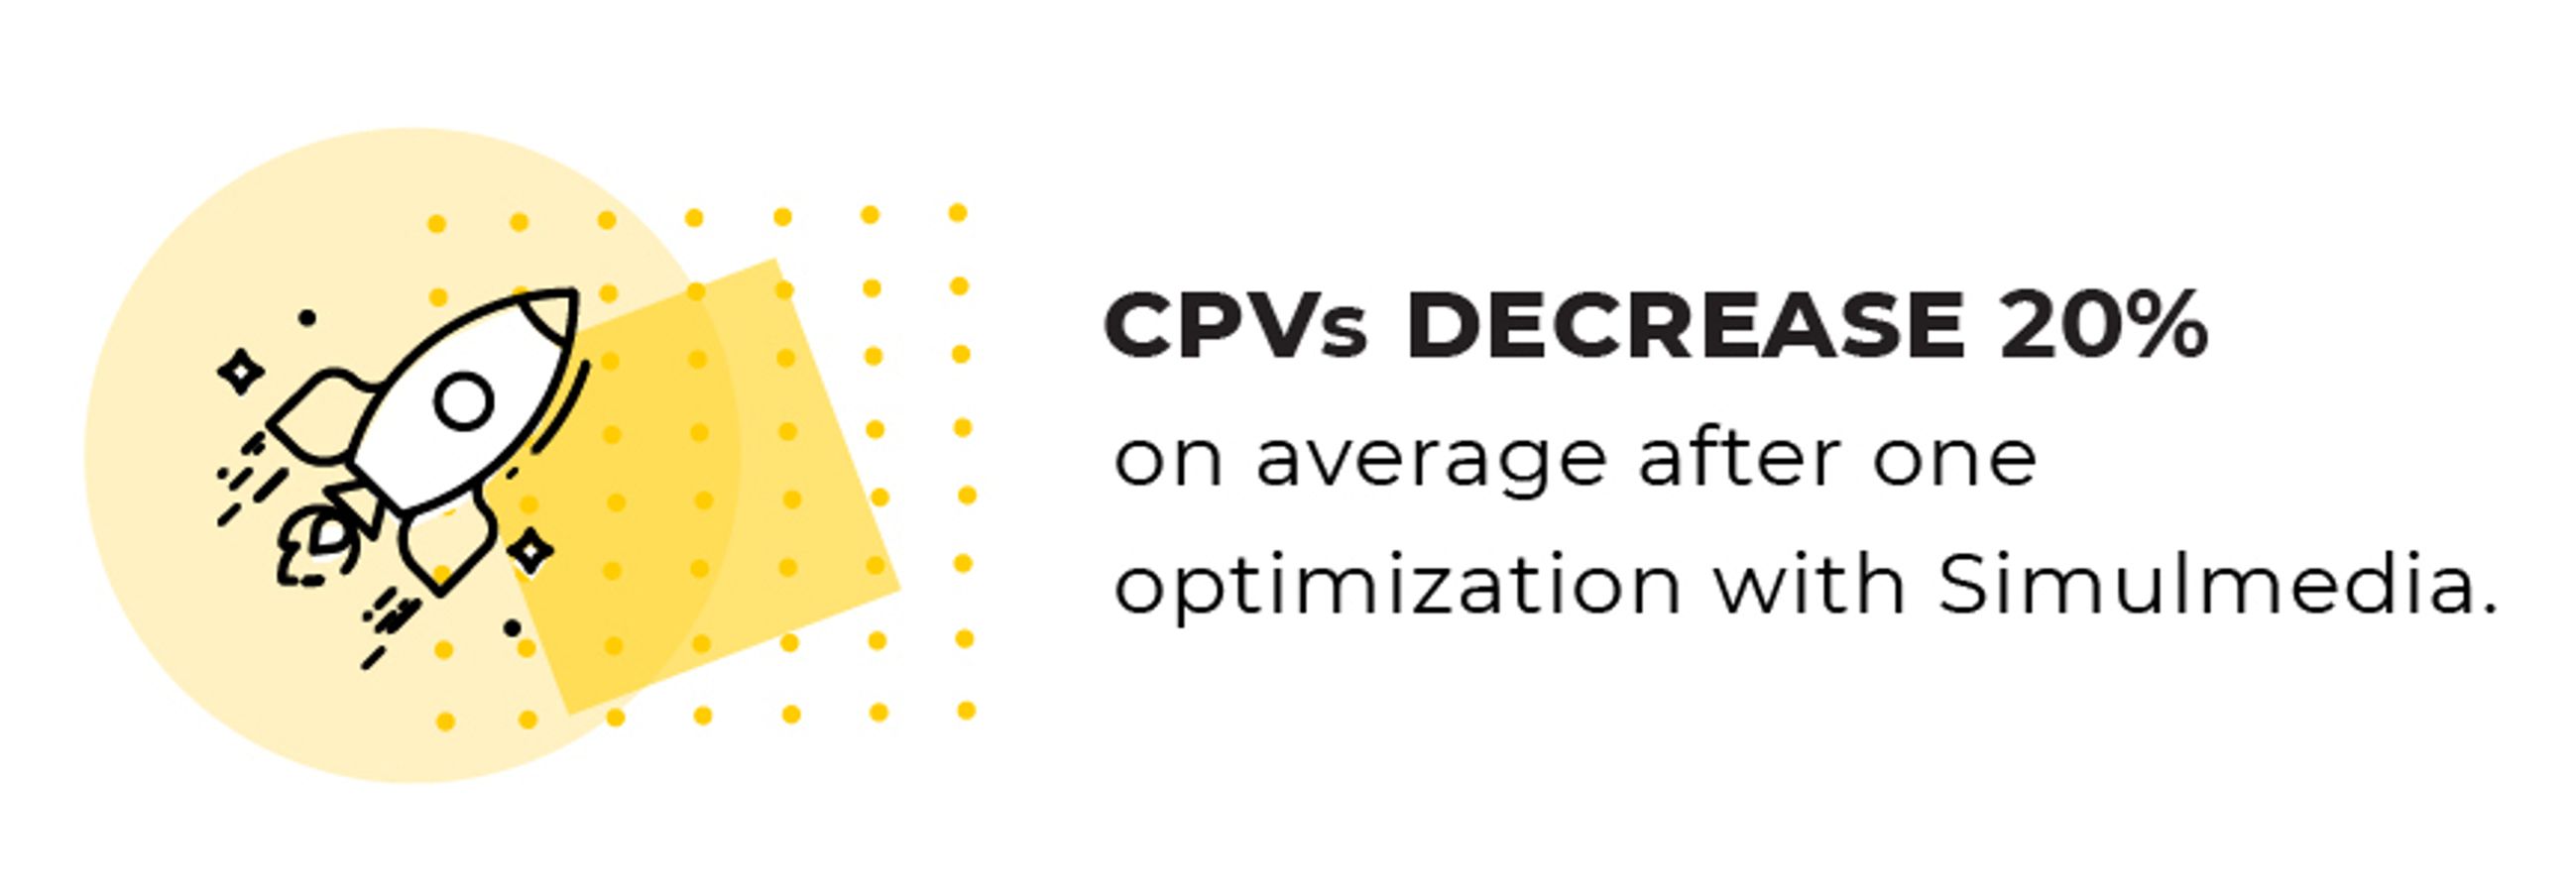 Cost-per-visitor decreases 20% on average after one TV advertising campaign optimization with Simulmedia.